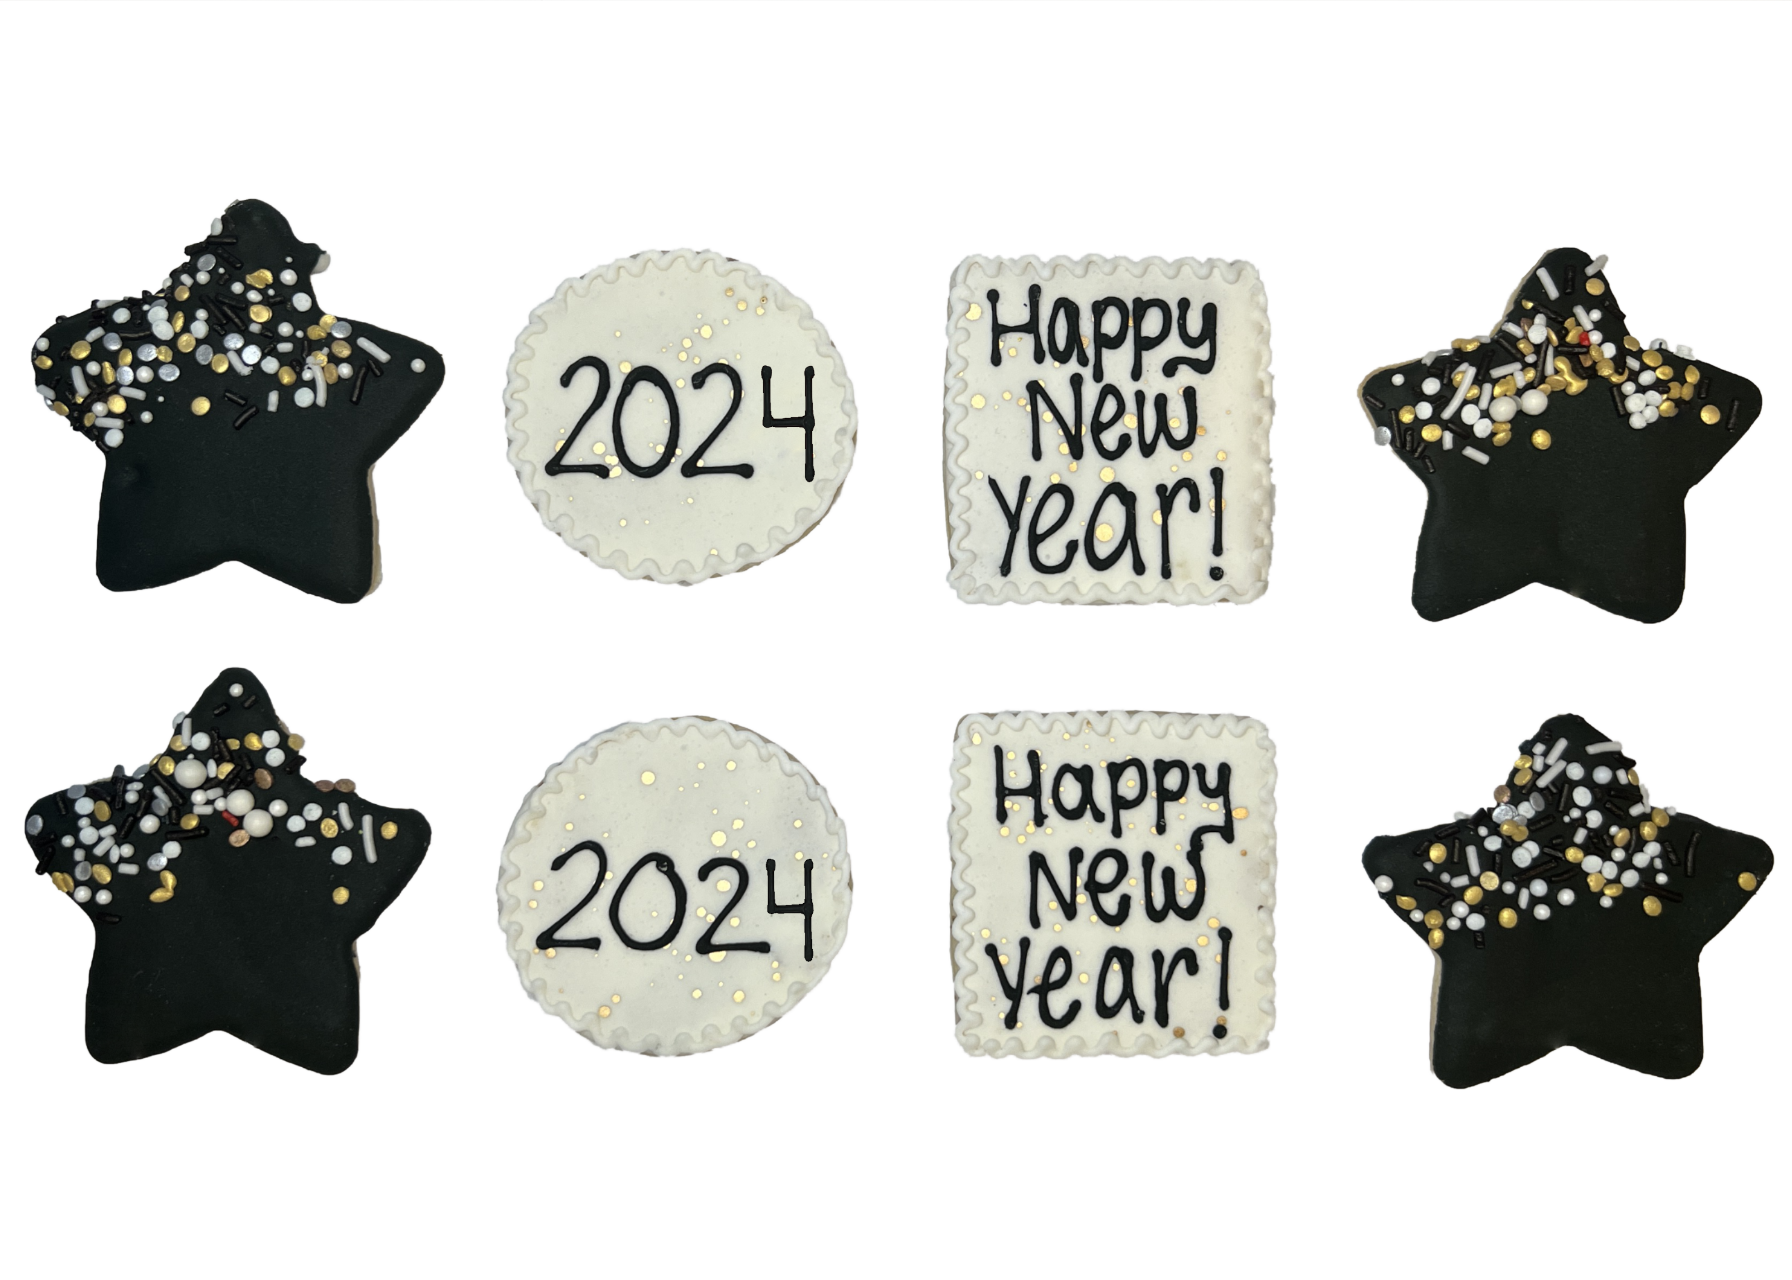 New Year Cookies-EventCateringHouston.com